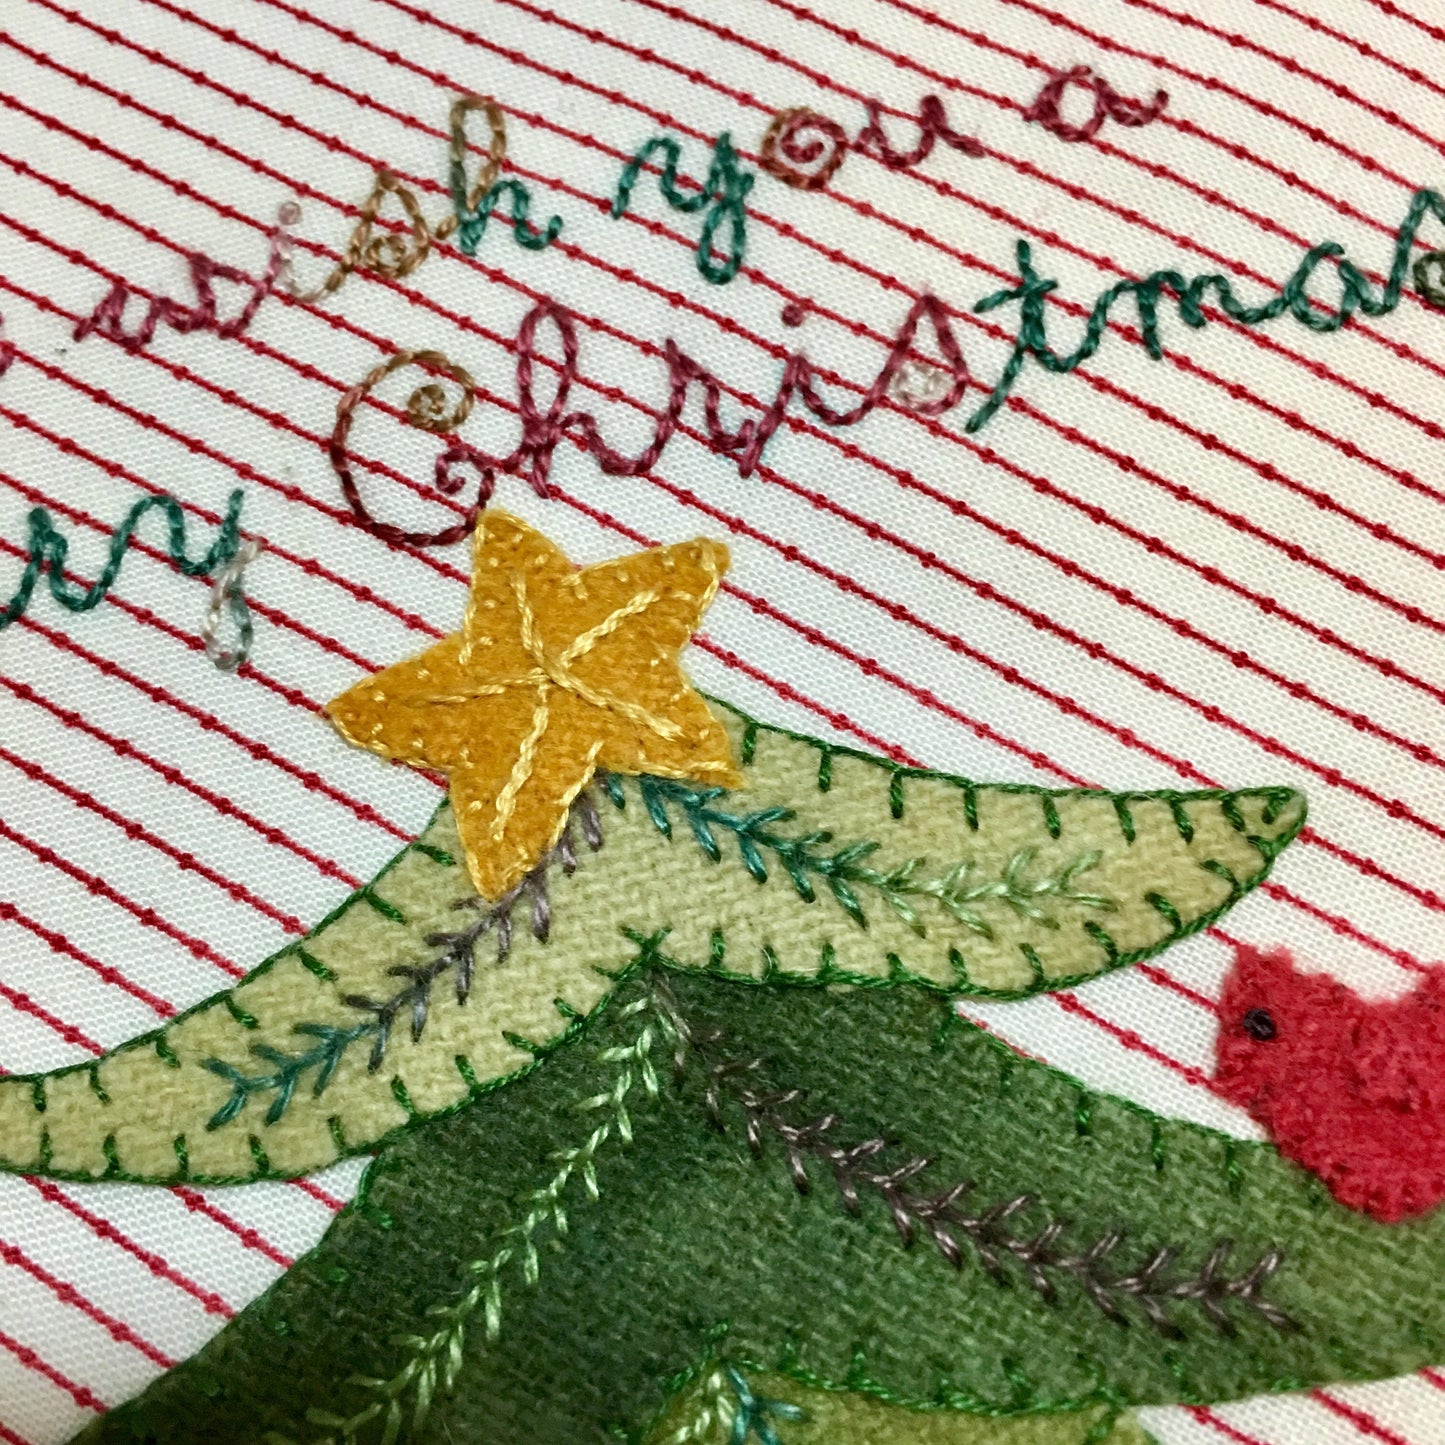 Pattern #107 - We Wish You a Merry Christmas